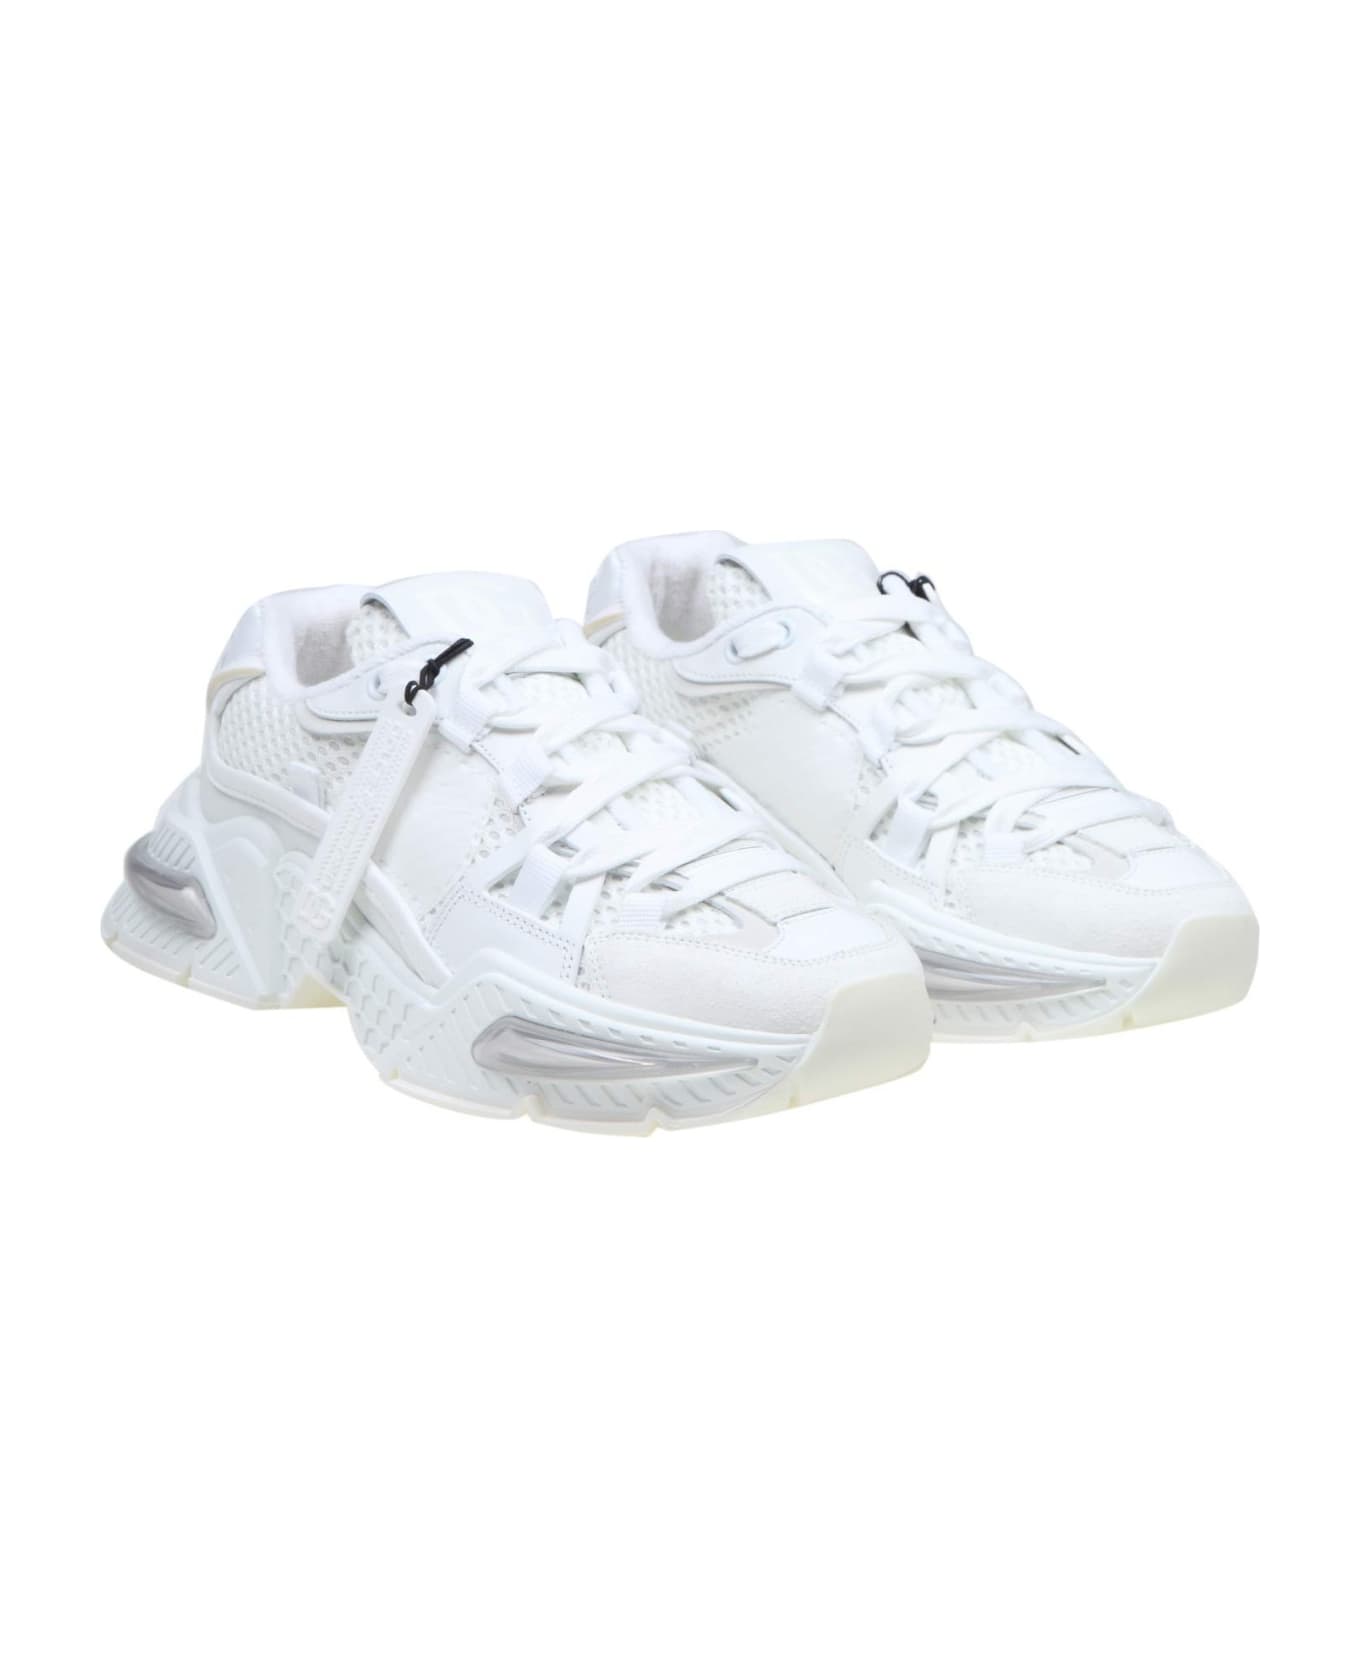 Dolce & Gabbana Airmaster Sneakers In Mesh And Suede - WHITE